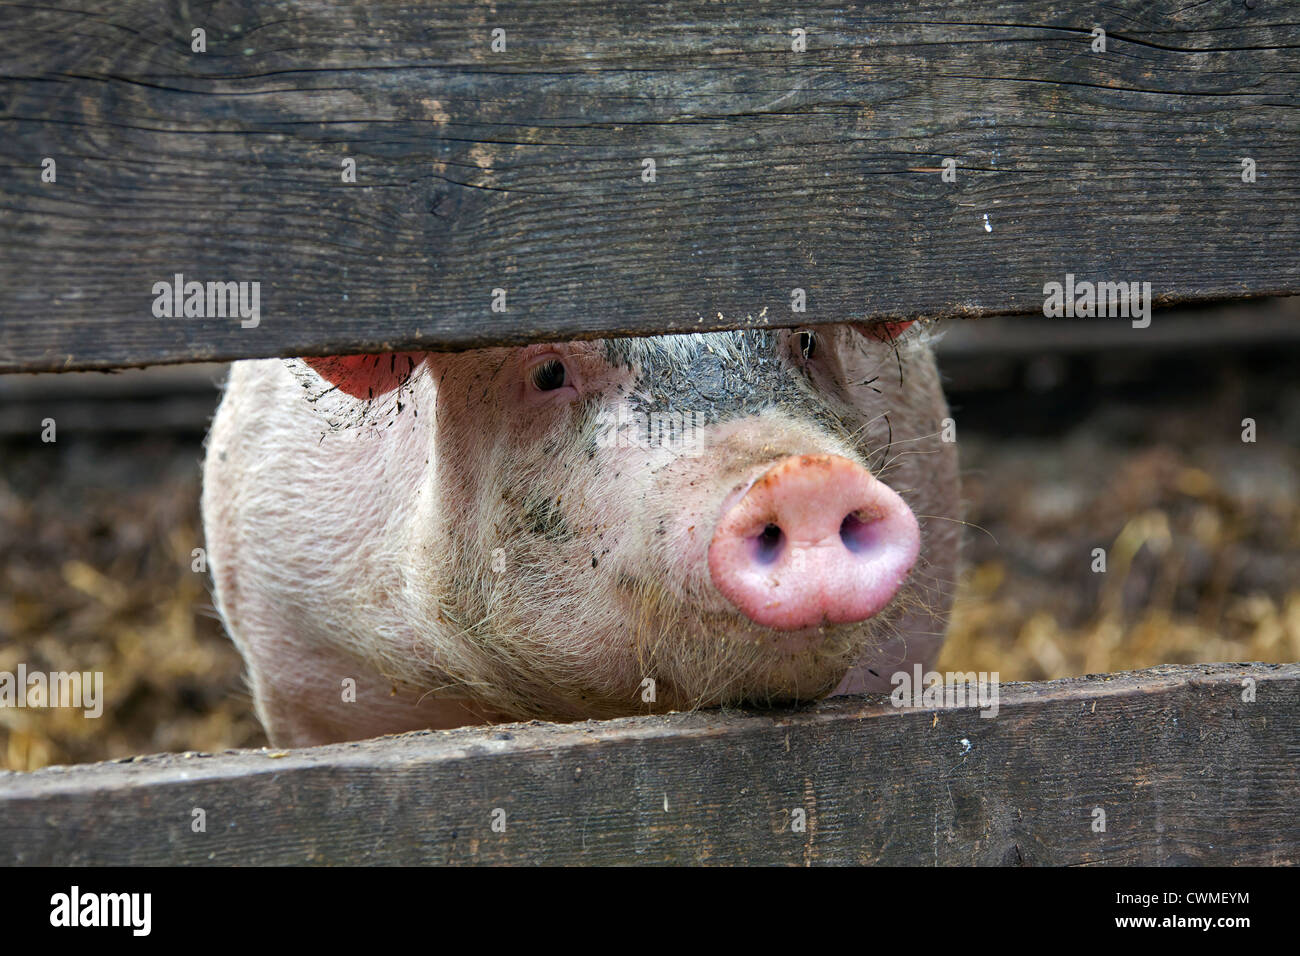 Curious domestic pig (Sus scrofa domesticus) looking through planks of wooden fence, Germany Stock Photo